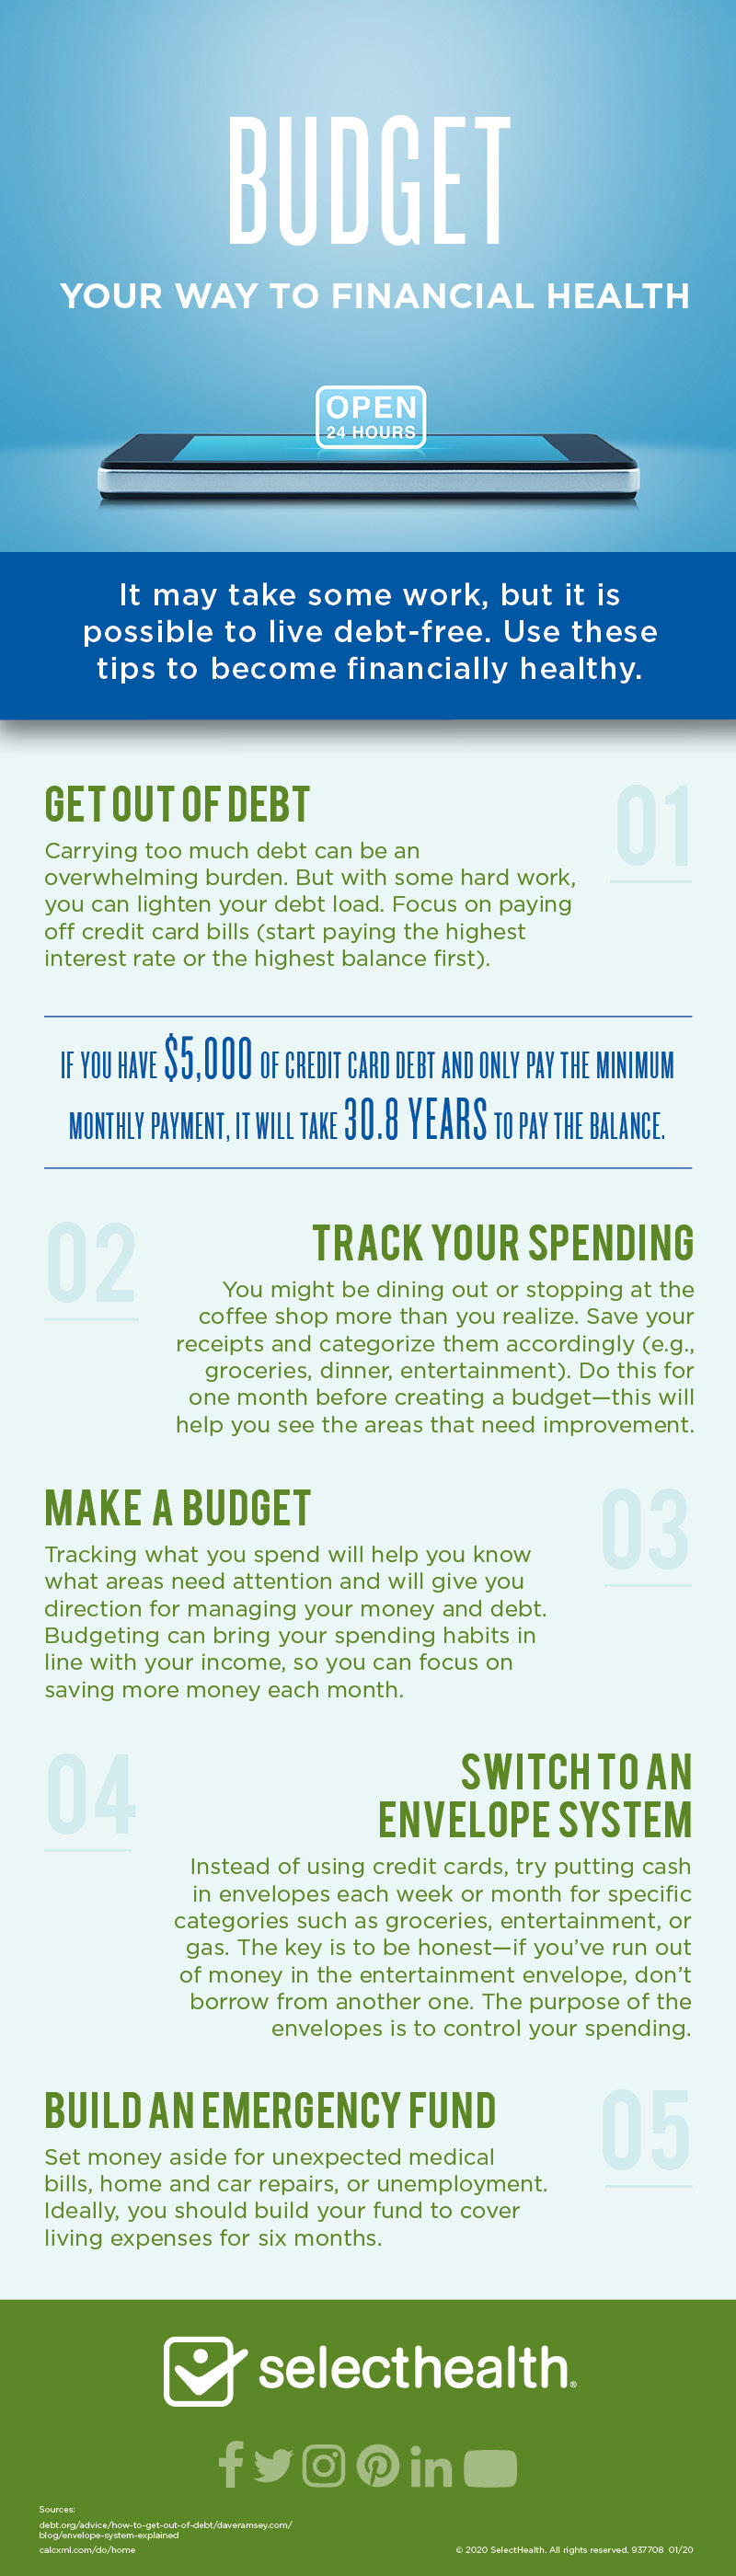 Budget Your Way To Financial Health Infographic